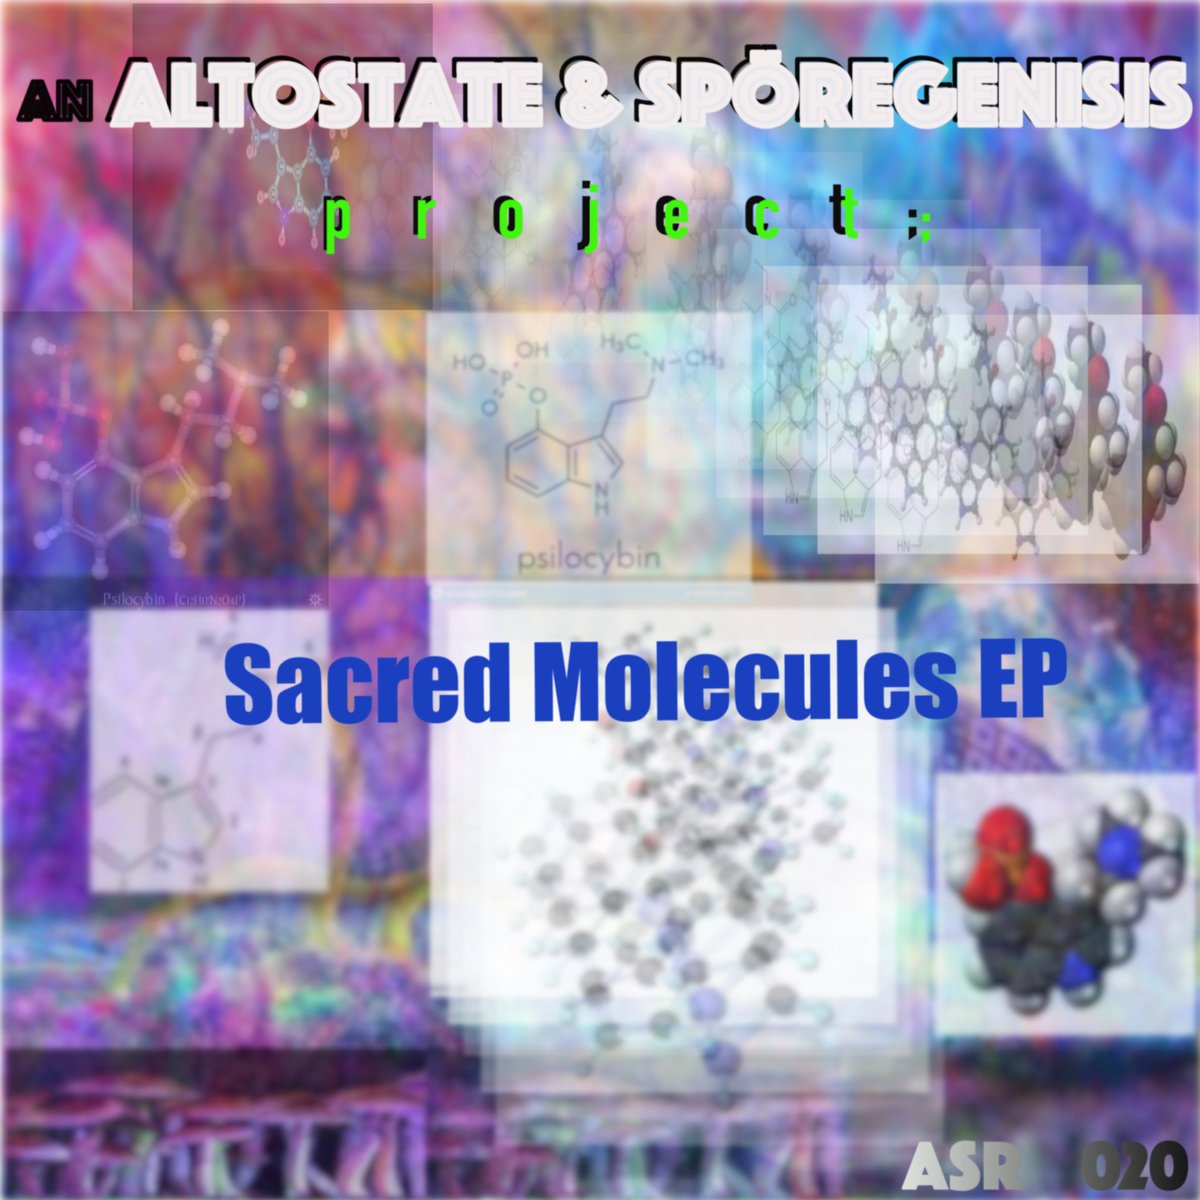 Are there any Sacred Molecules in you're Universe?

Sacred Molecules EP
soundcloud.com/user-637740873…

@SLEEVE6666 @JoanneJ96366976 @SamarappuligeP1 @Yogishine @WudRecords @111heavenearth @LadislawWilliam @knowgood43r
@acidcat303 @RobertEibach
@CAA_Official  #ambient #trancemusic #edm